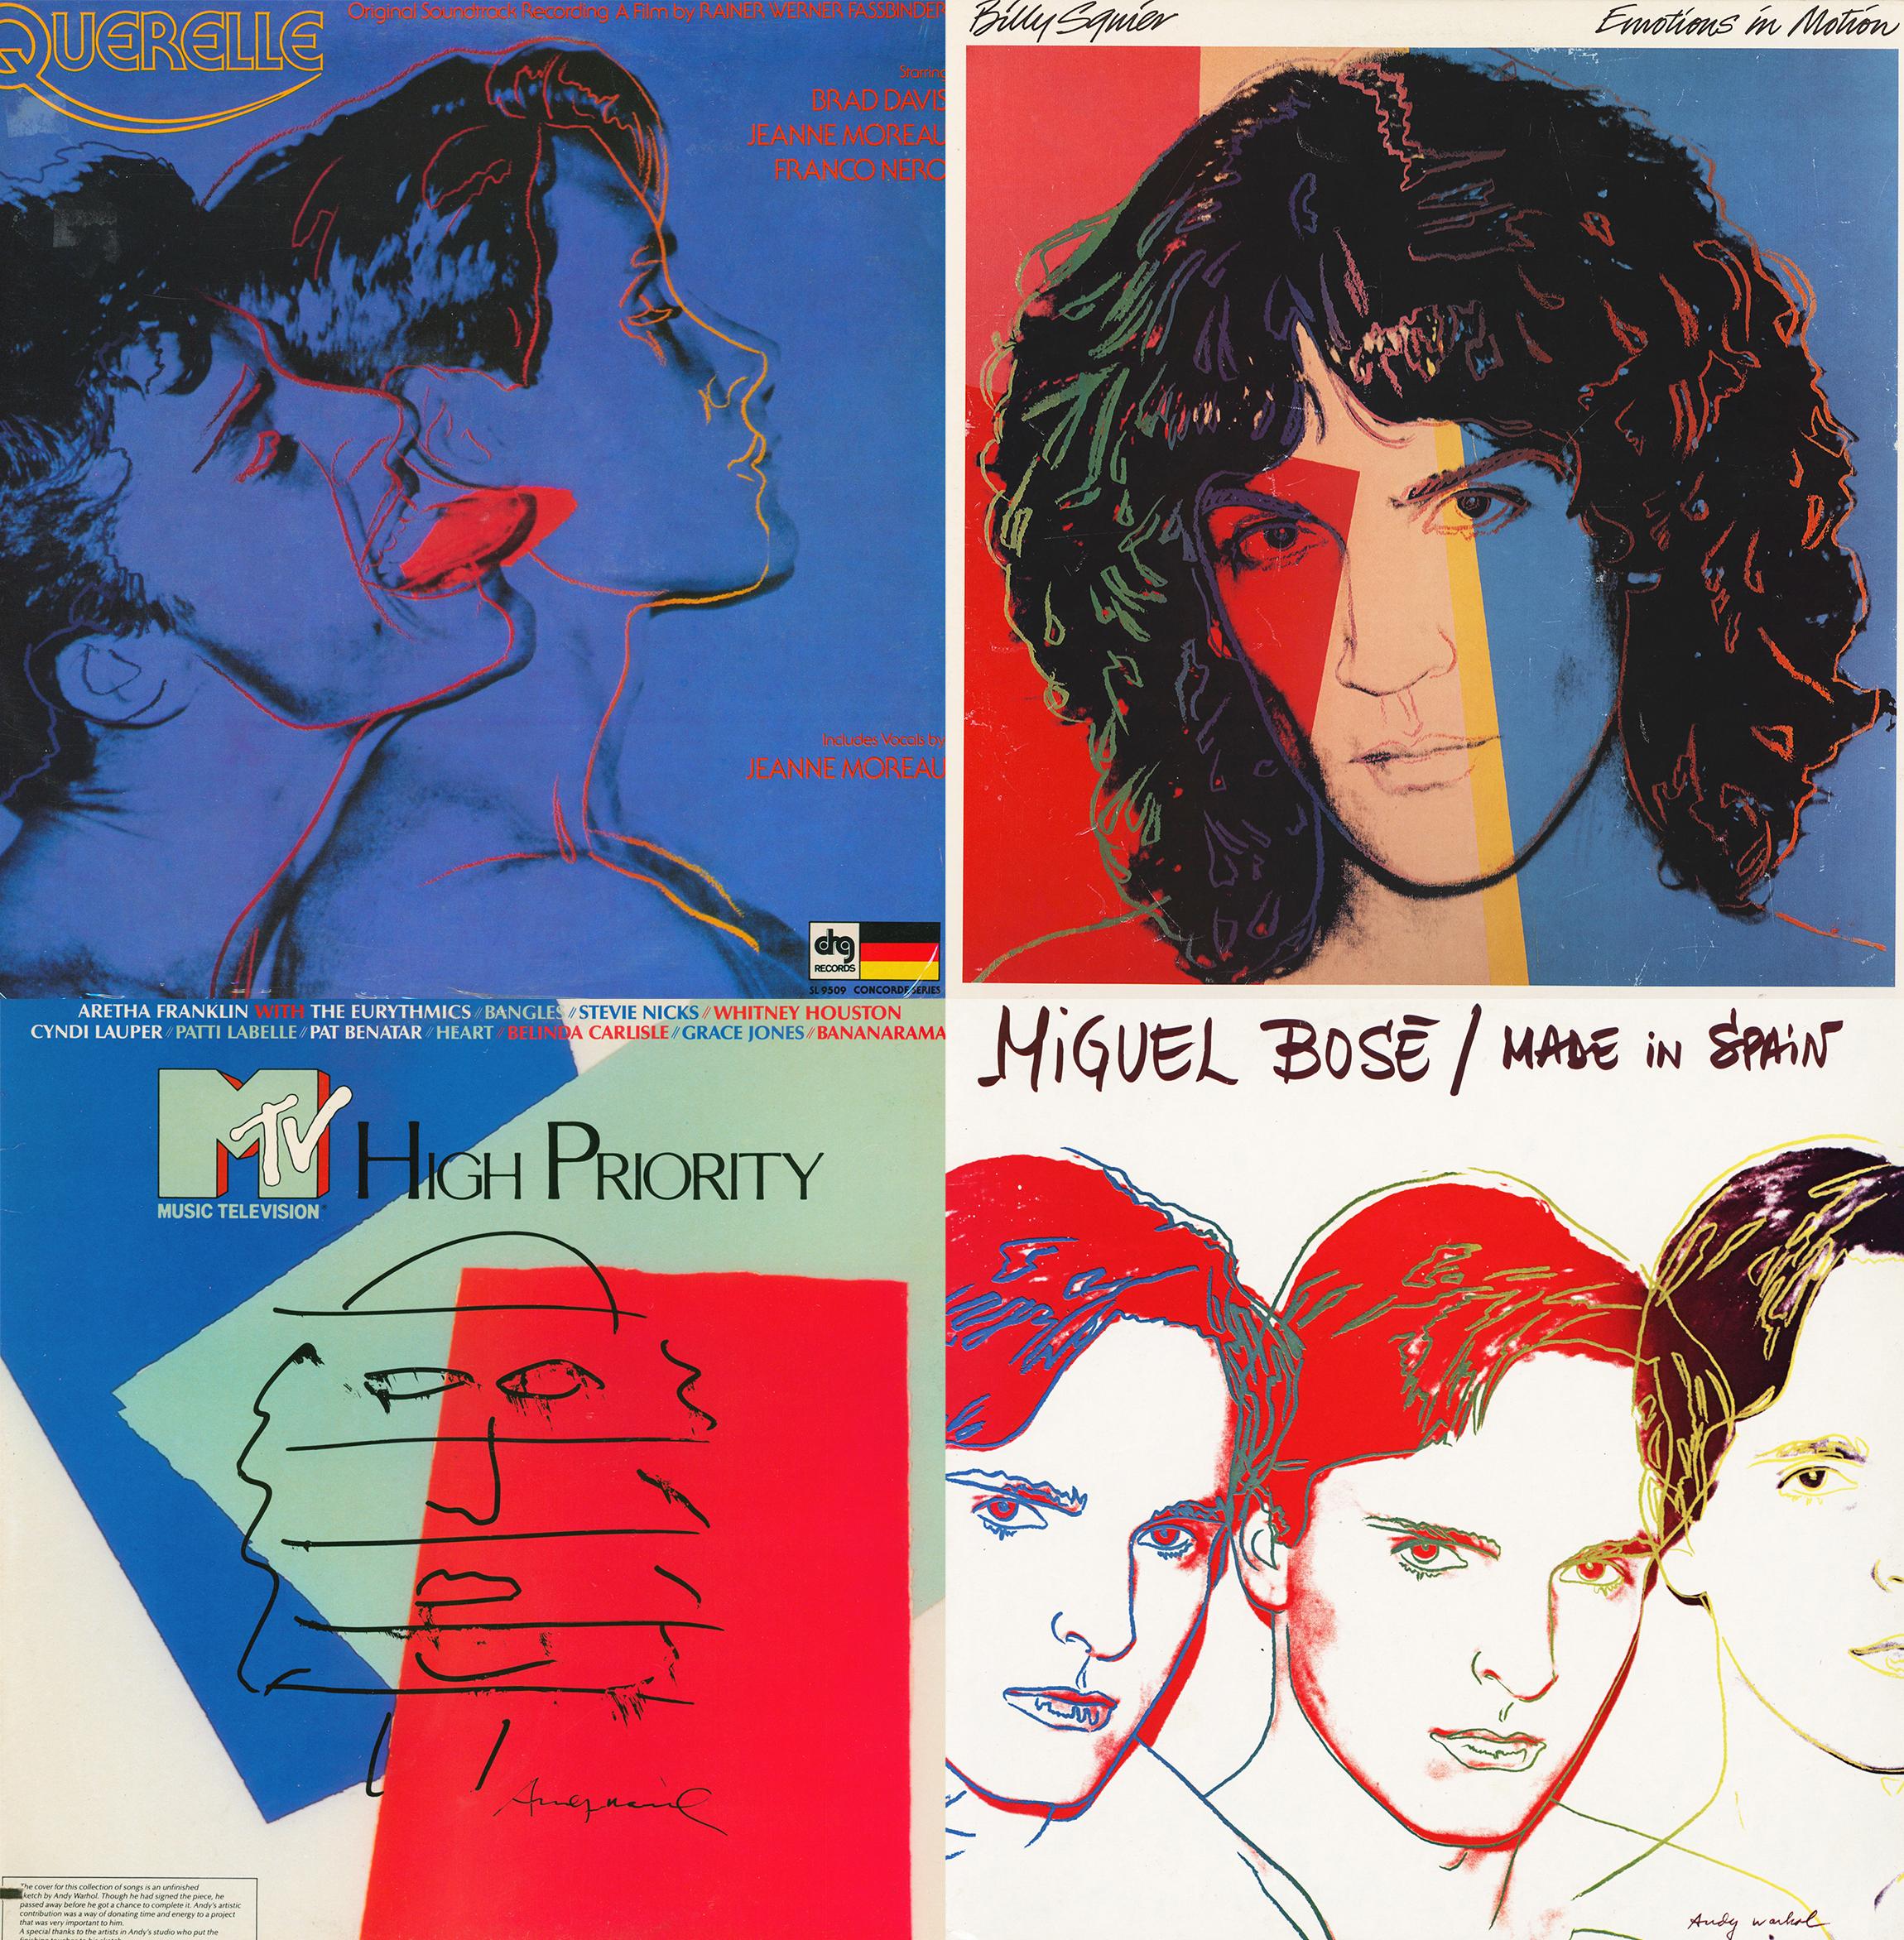 A collection of 4 LPs with individual cover art designed by Andy Warhol. Featuring the following recording artists & albums:
- Querelle (Original Motion Picture Soundtrack) by Peer Raben & David Ambach
- Emotions in Motion by Billy Squier
- MTV High